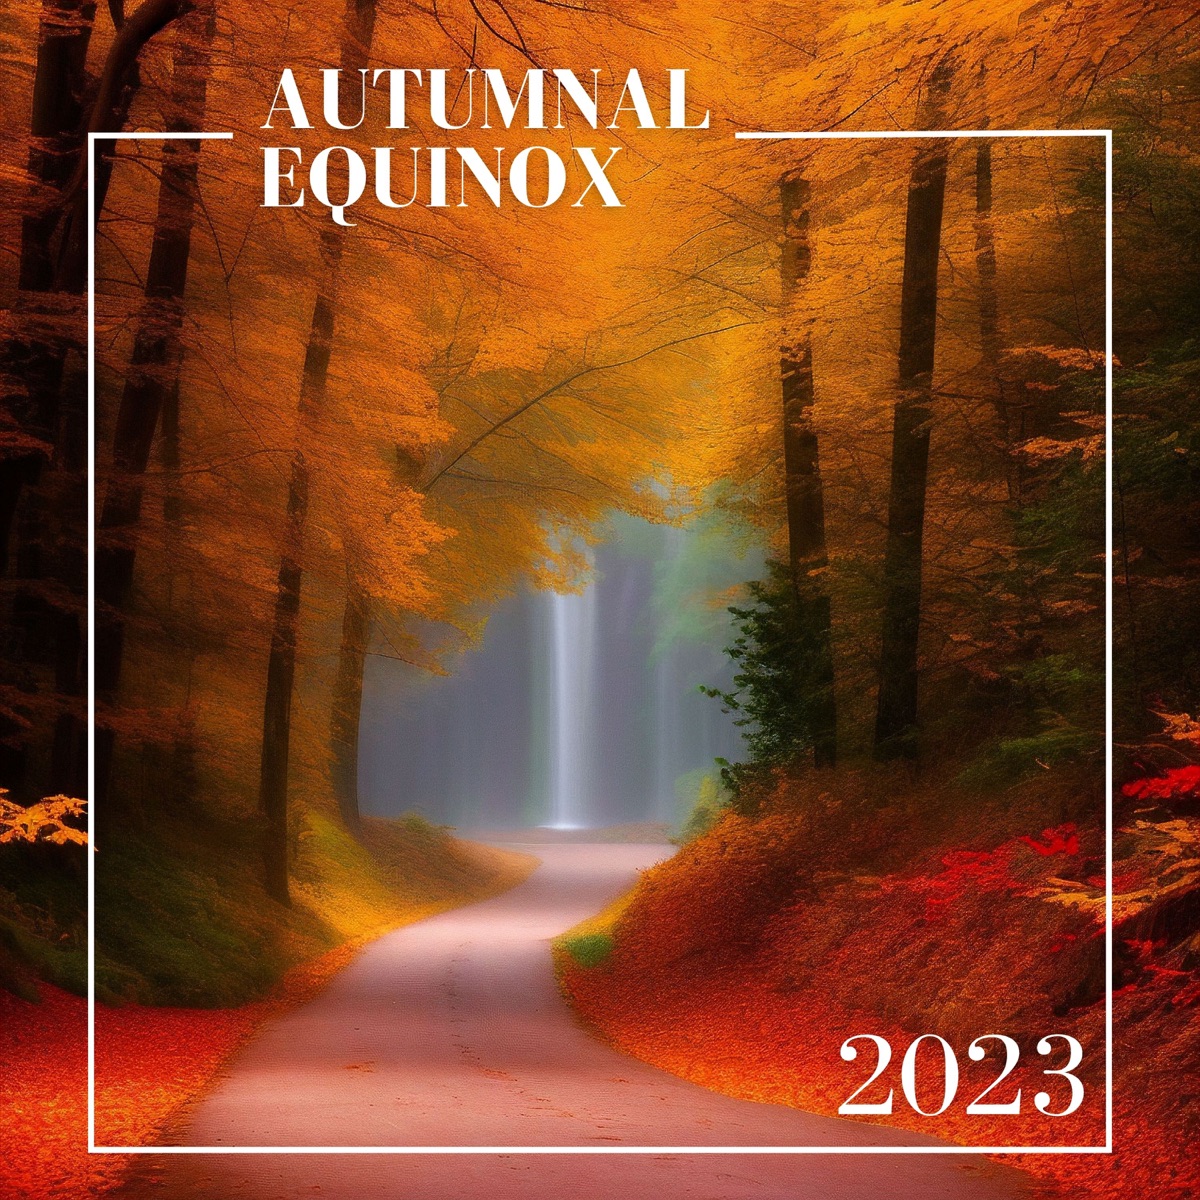 When does autumn start in 2023 and what is the autumnal equinox?